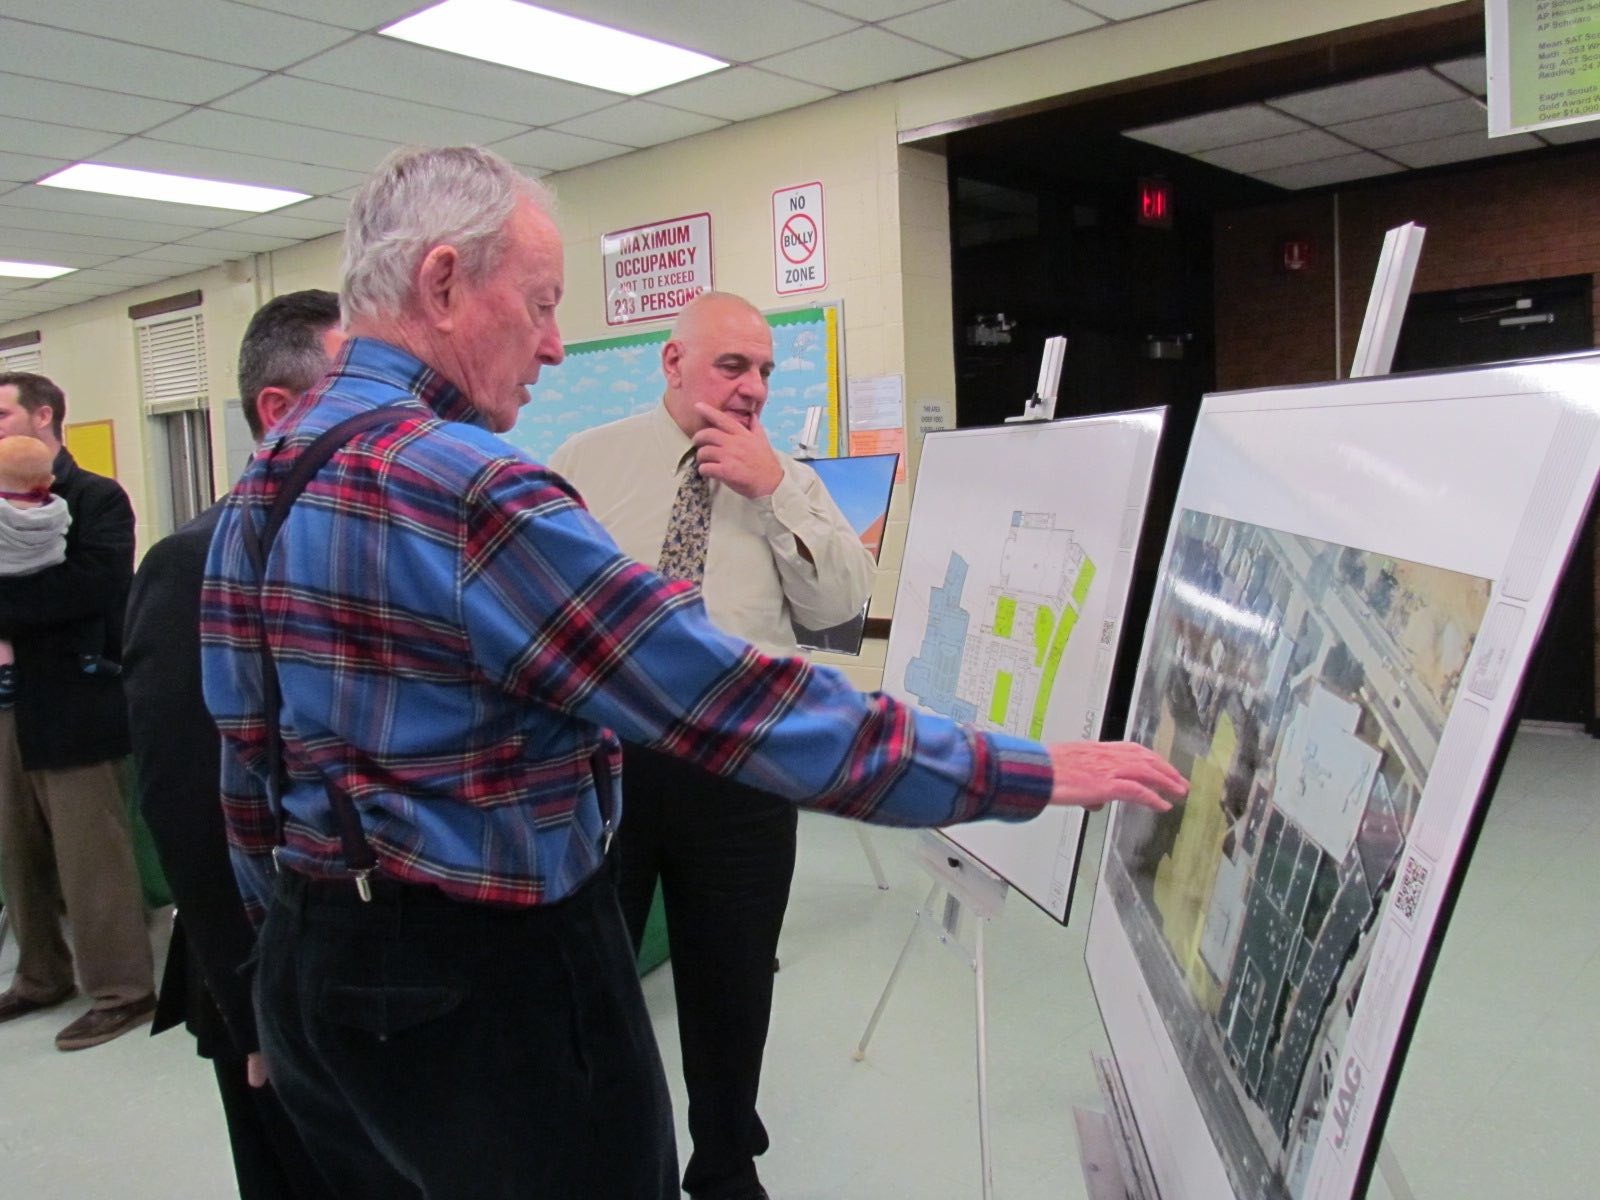 Bob Sympson observed the renovation plans provided by the project’s architectural firm.